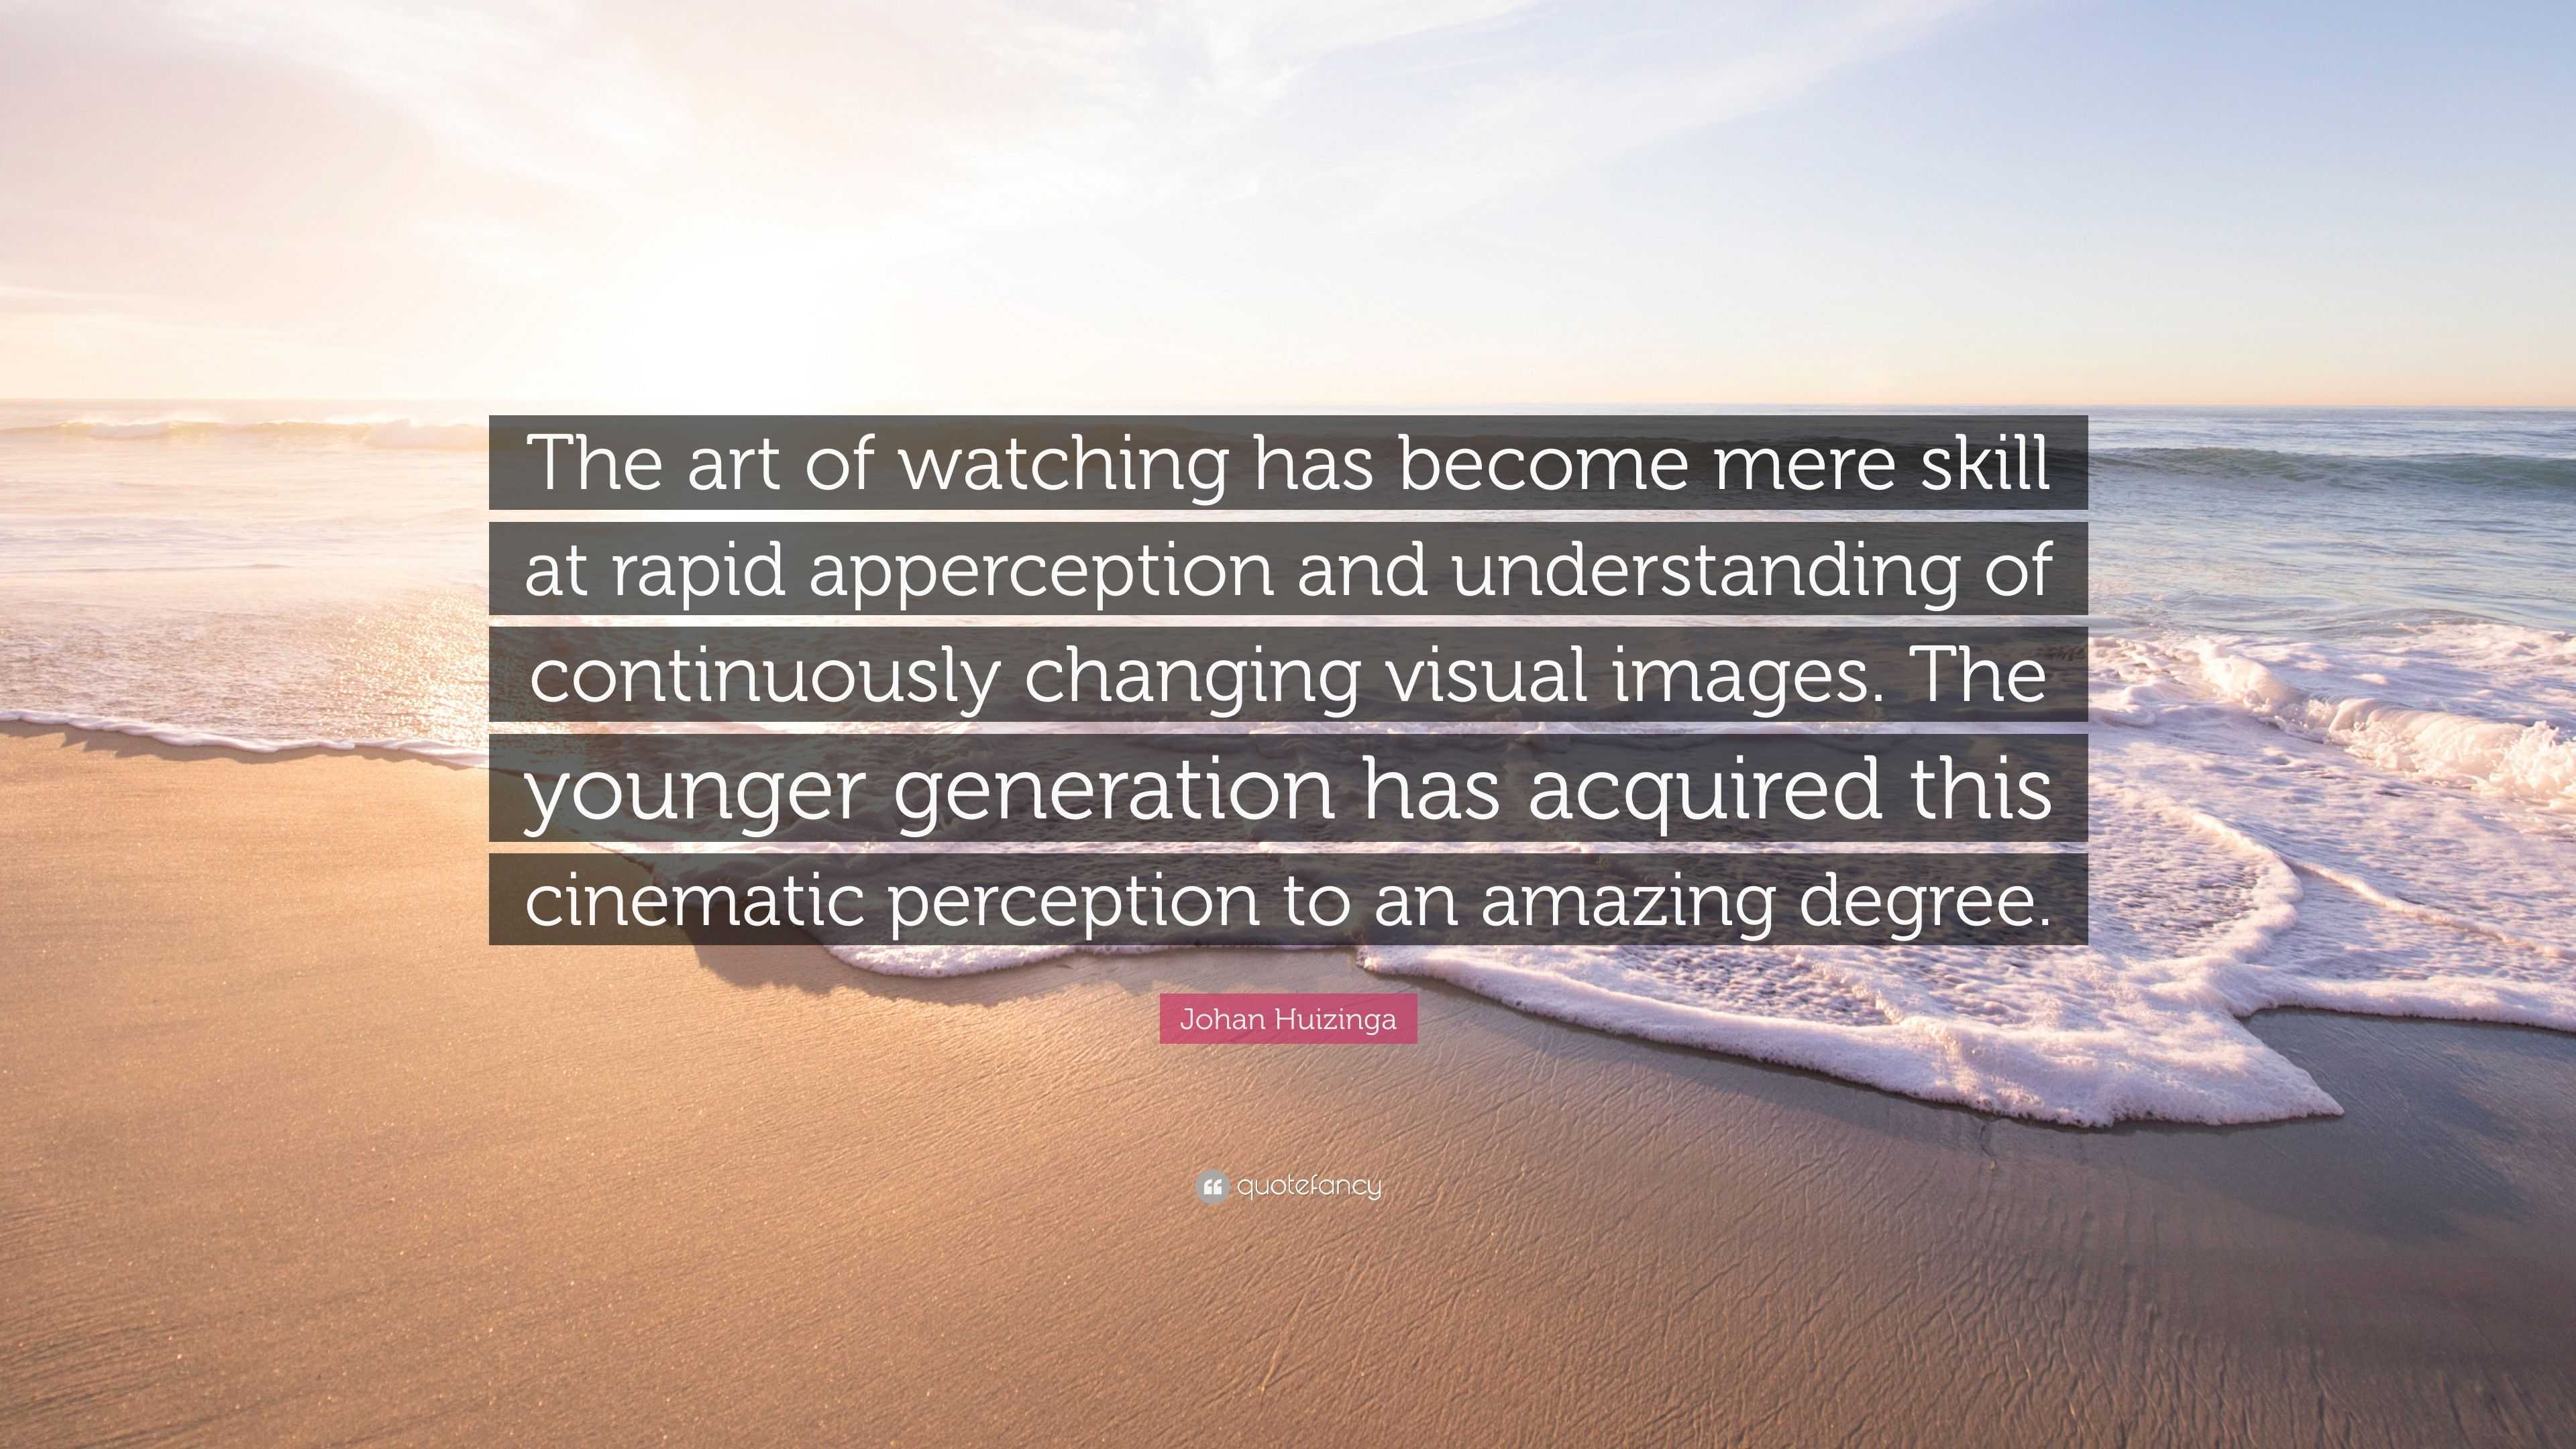 4354536 Johan Huizinga Quote The art of watching has become mere skill at